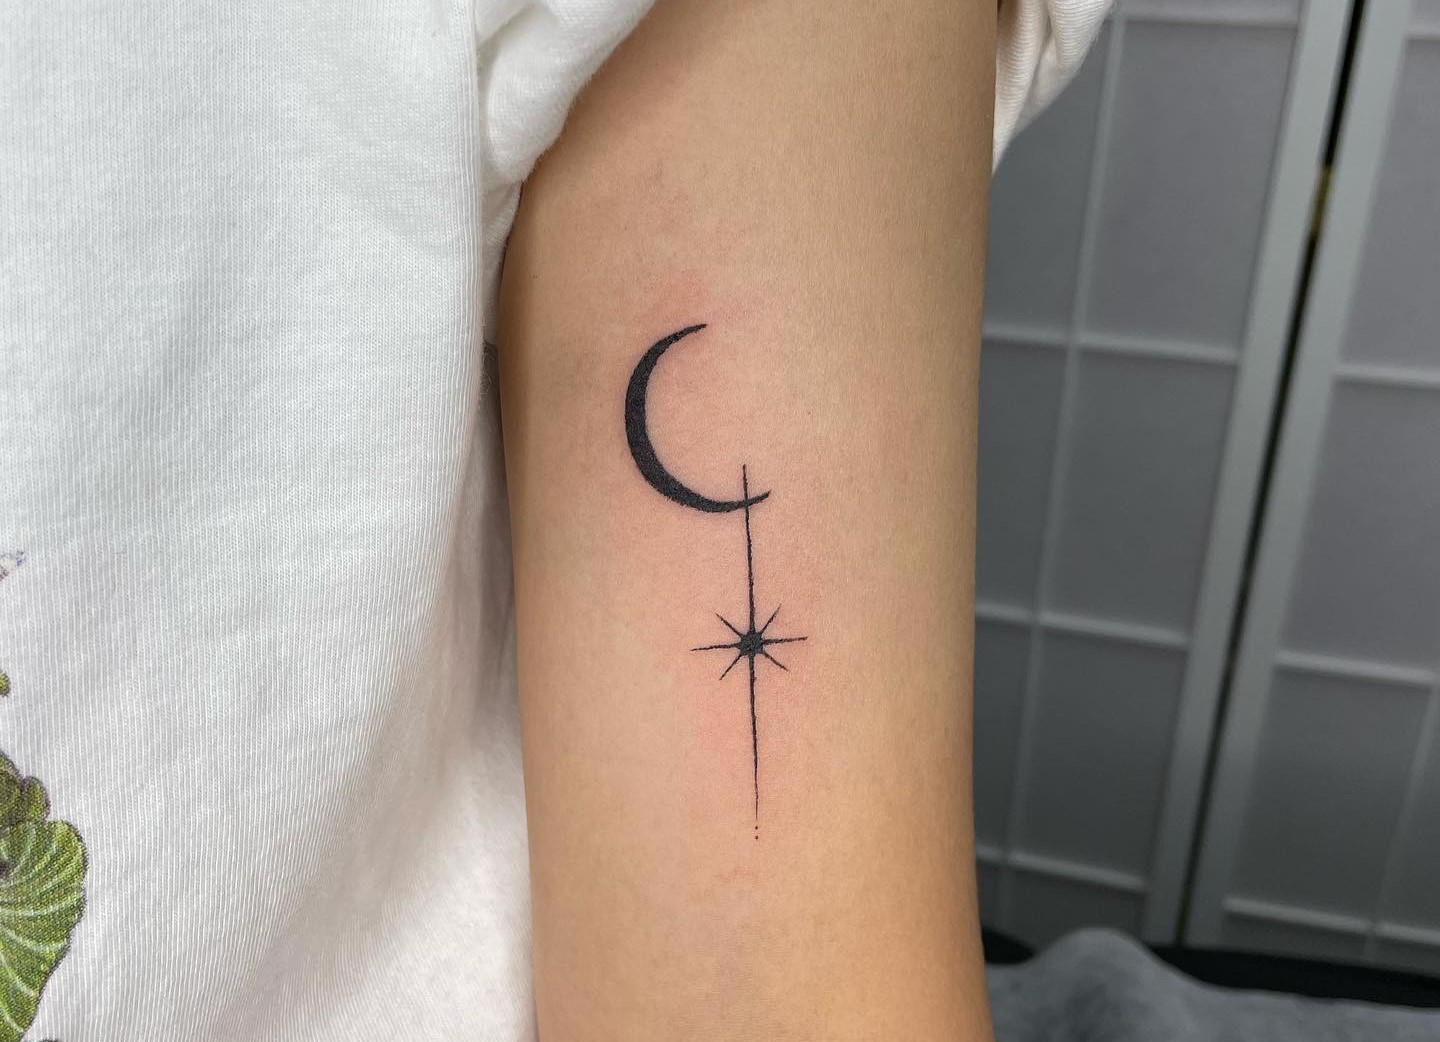 20 Dreamy Moon Tattoo Designs  Meaning  Star tattoos Moon tattoo  designs Tattoos for women